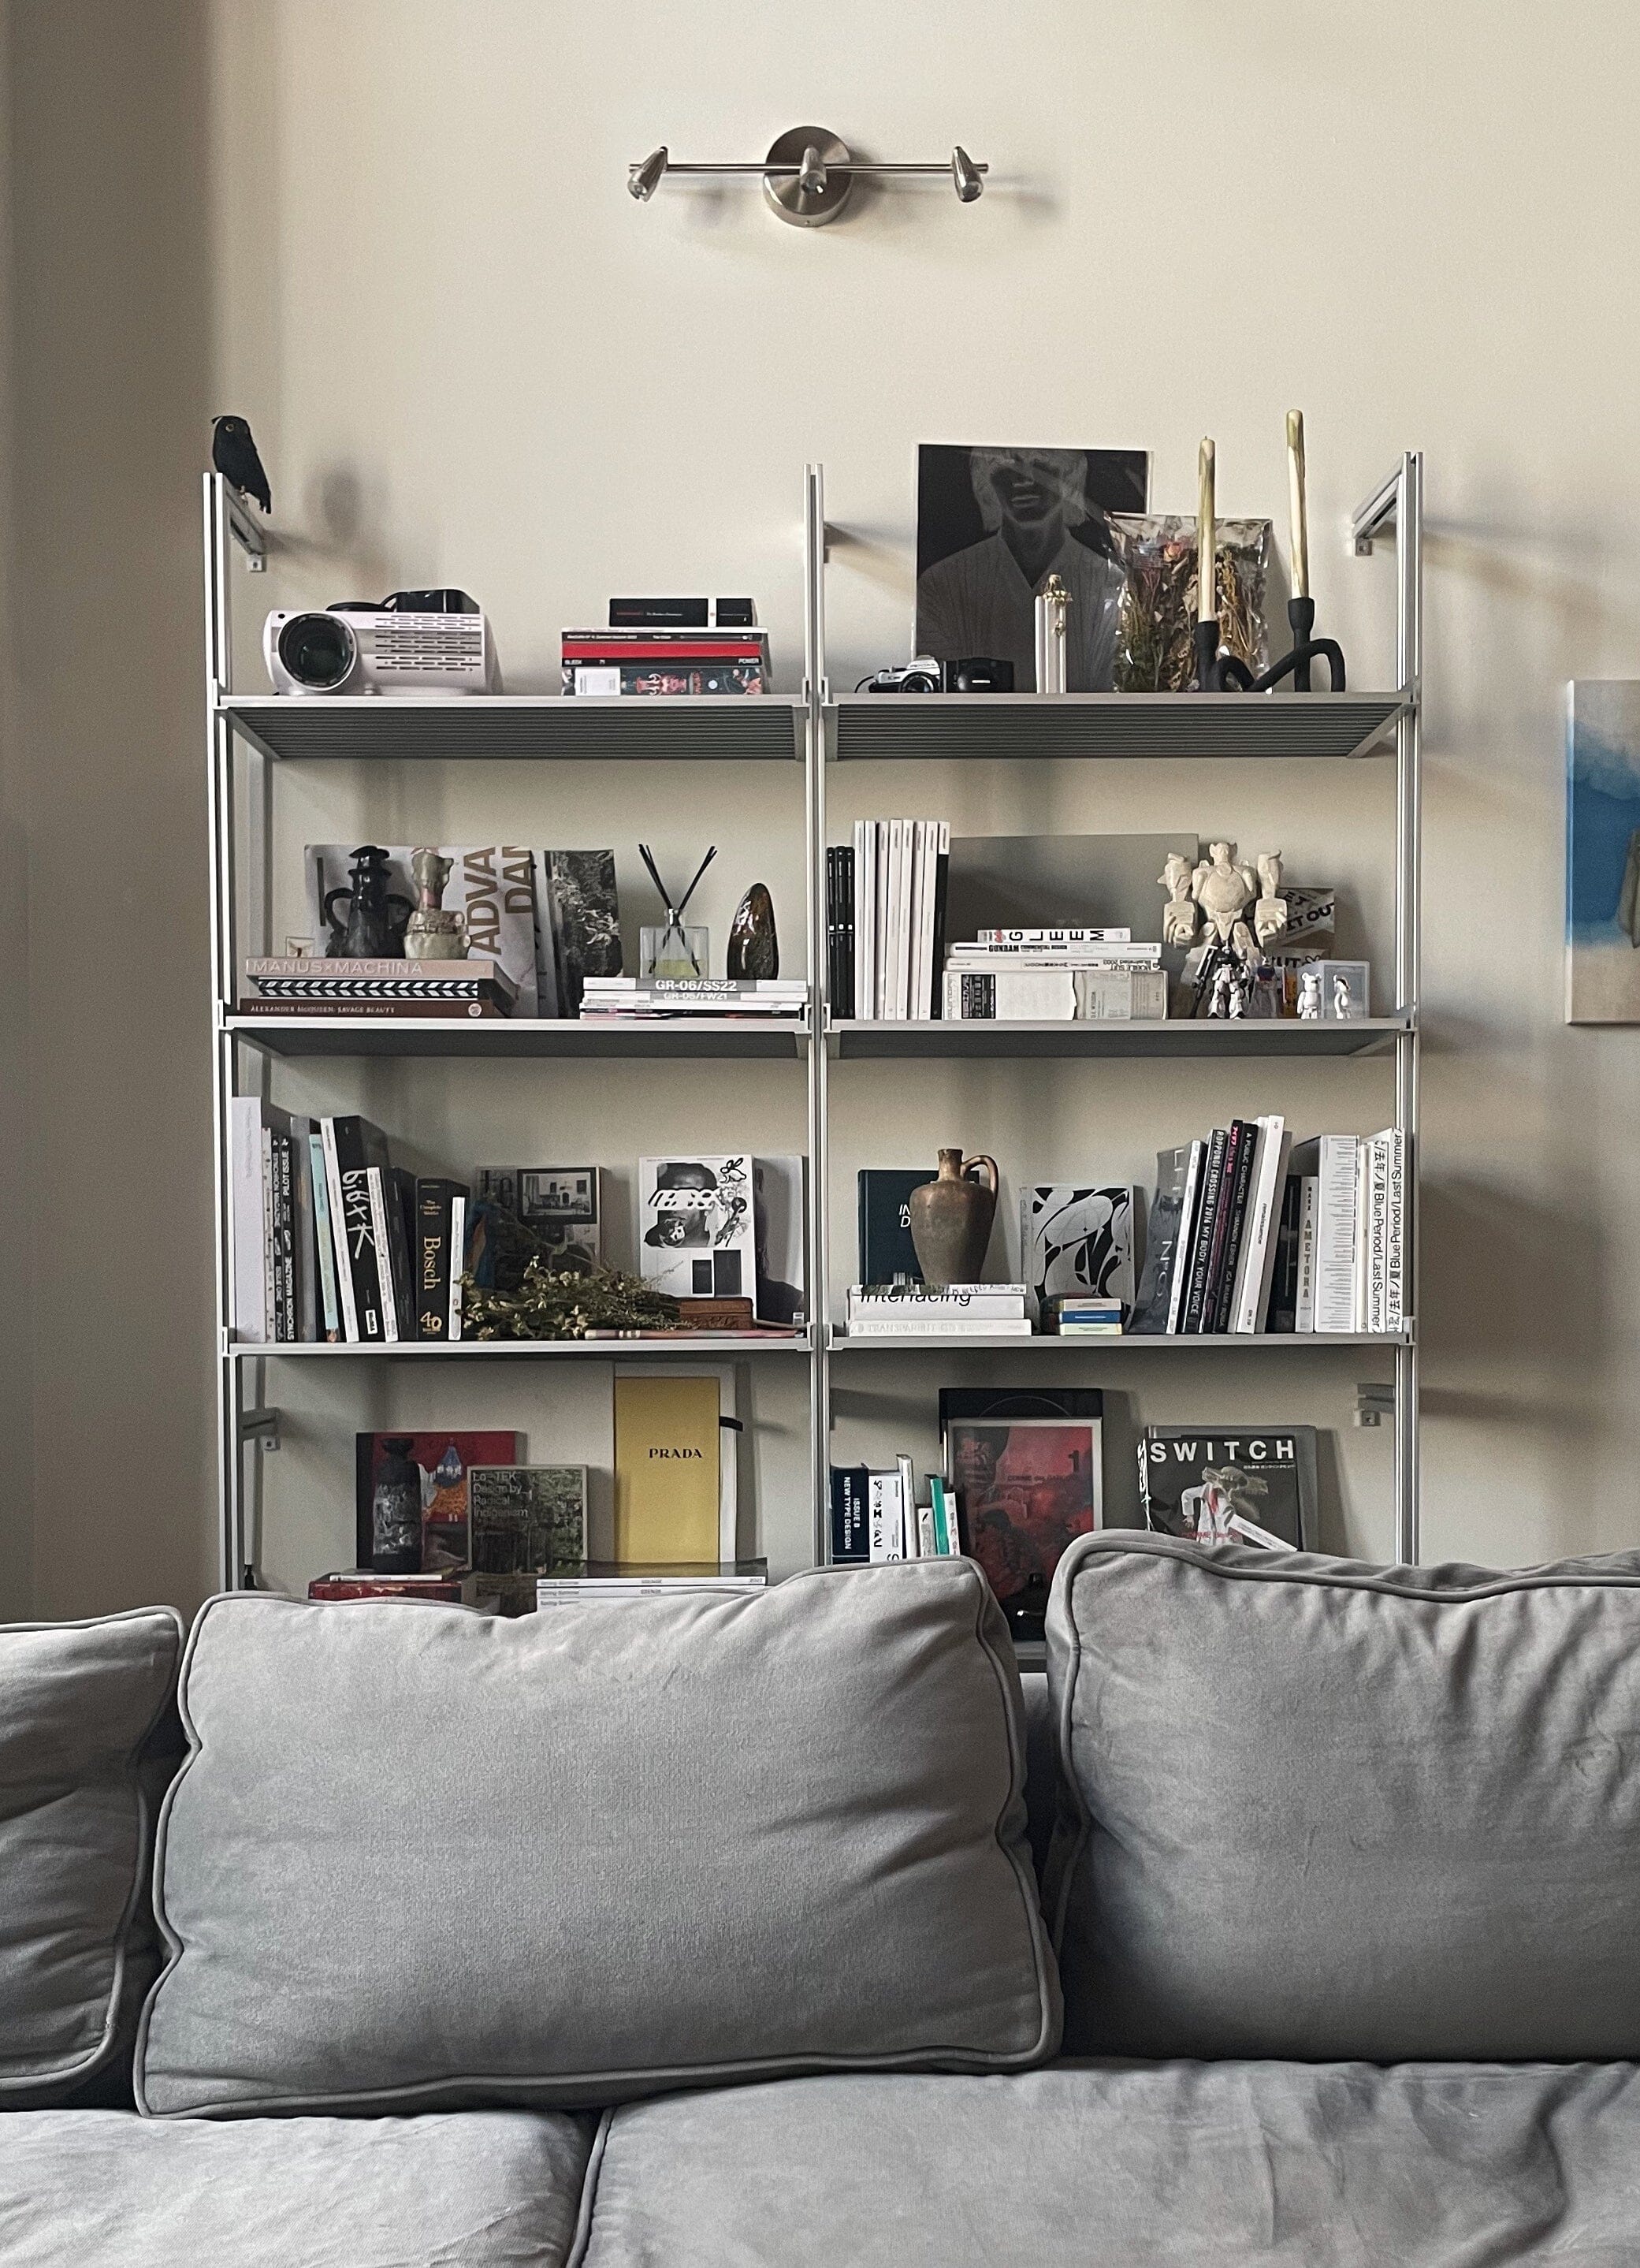 Designers Use Shelves to House Their Art Book and Boot Collections